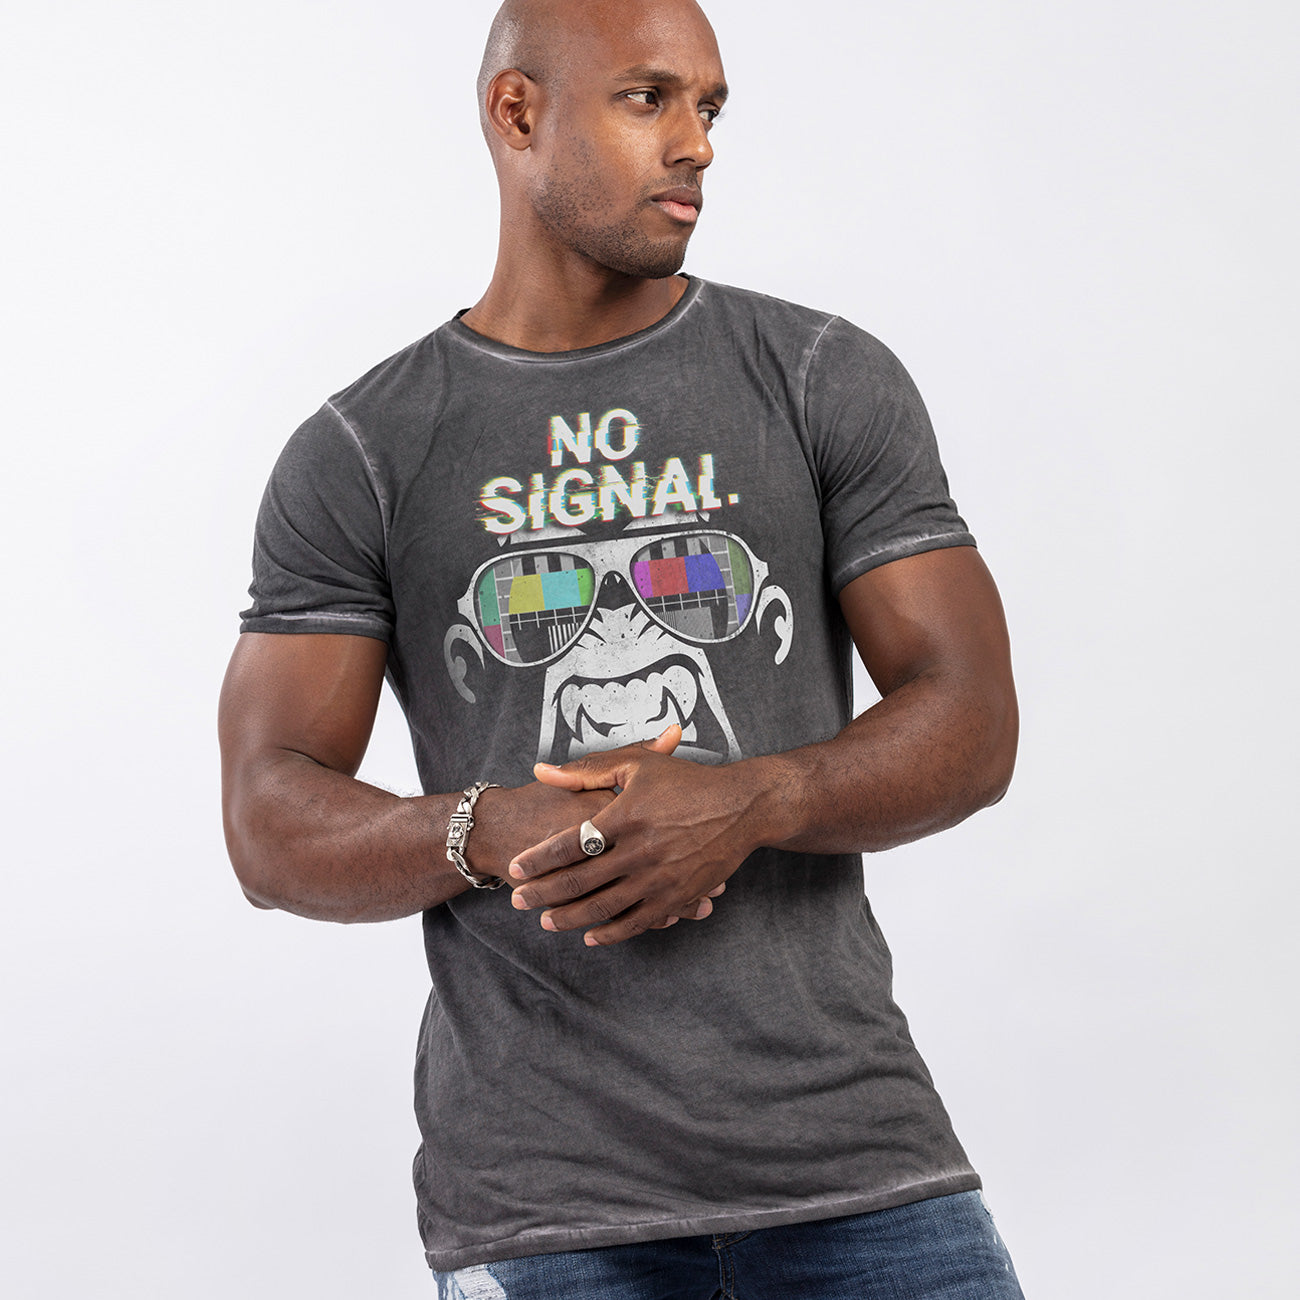 No Signal Black Tshirt | Available only in S